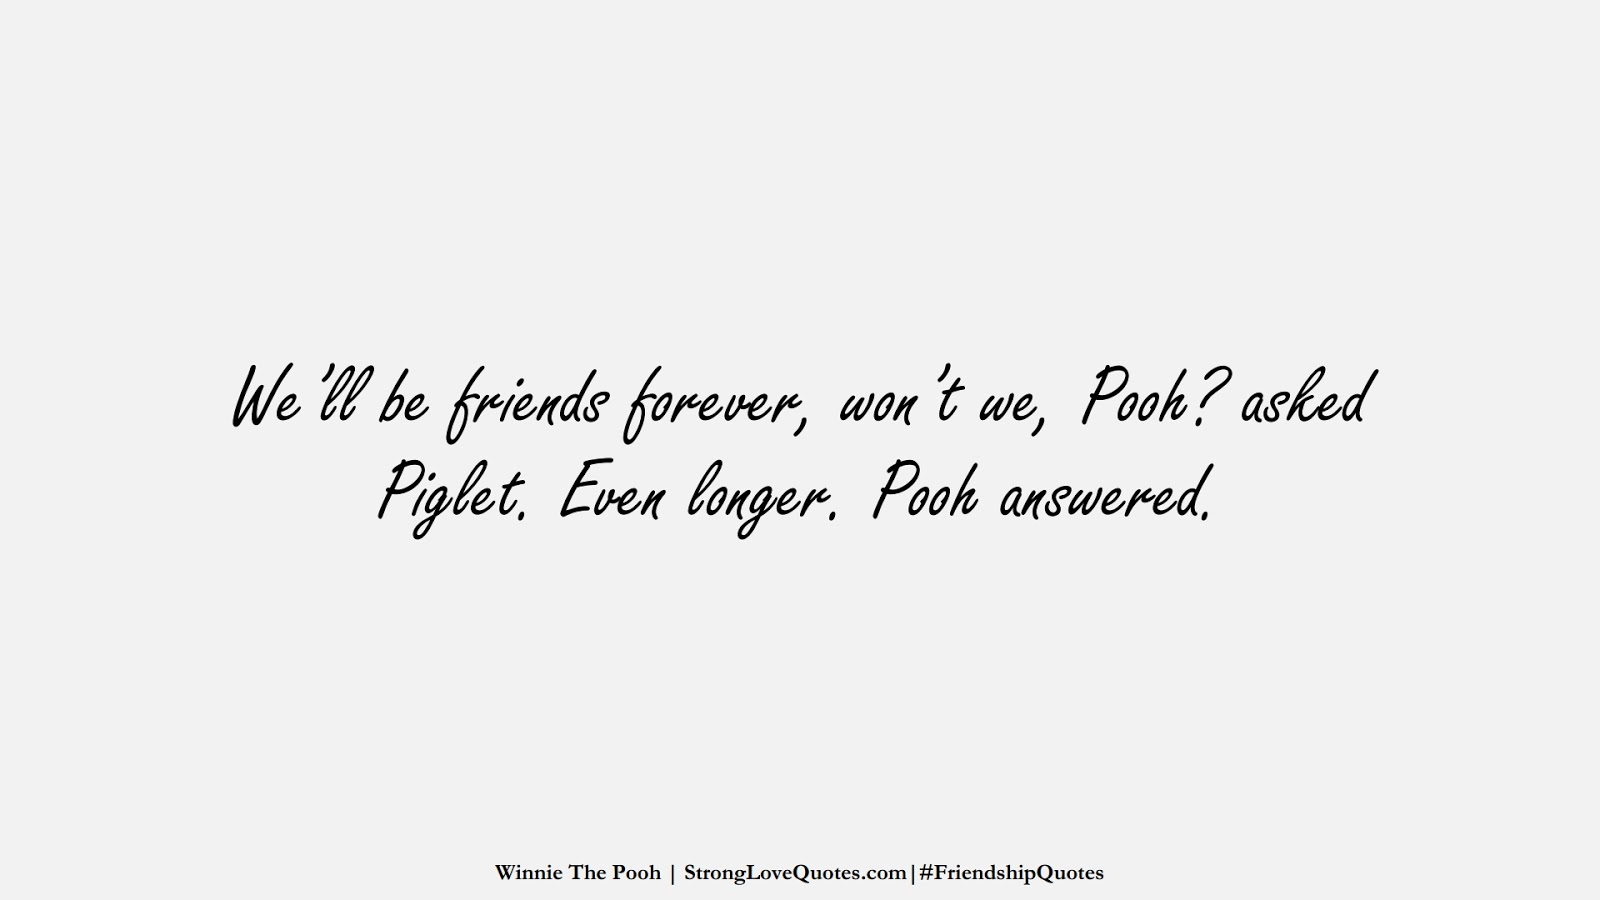 We’ll be friends forever, won’t we, Pooh? asked Piglet. Even longer. Pooh answered. (Winnie The Pooh);  #FriendshipQuotes